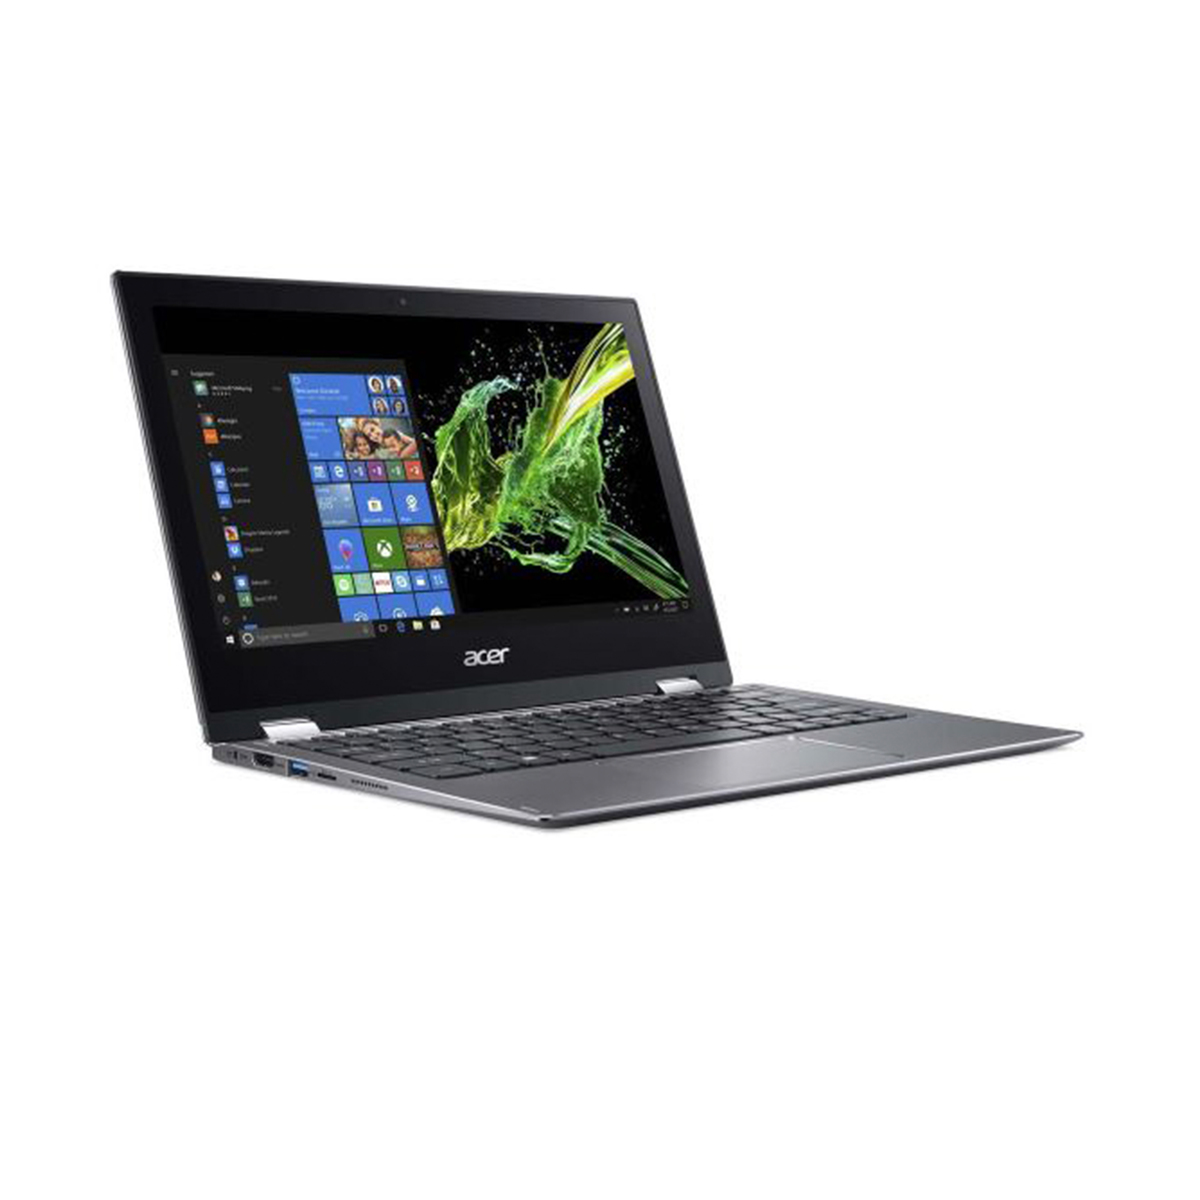 Acer Spin 3 Convertible Notebook ,HDD 1TB,128GB SSD, 8GB RAM,NVIDIA GeForce MX230 2GB, Core i5, Silver